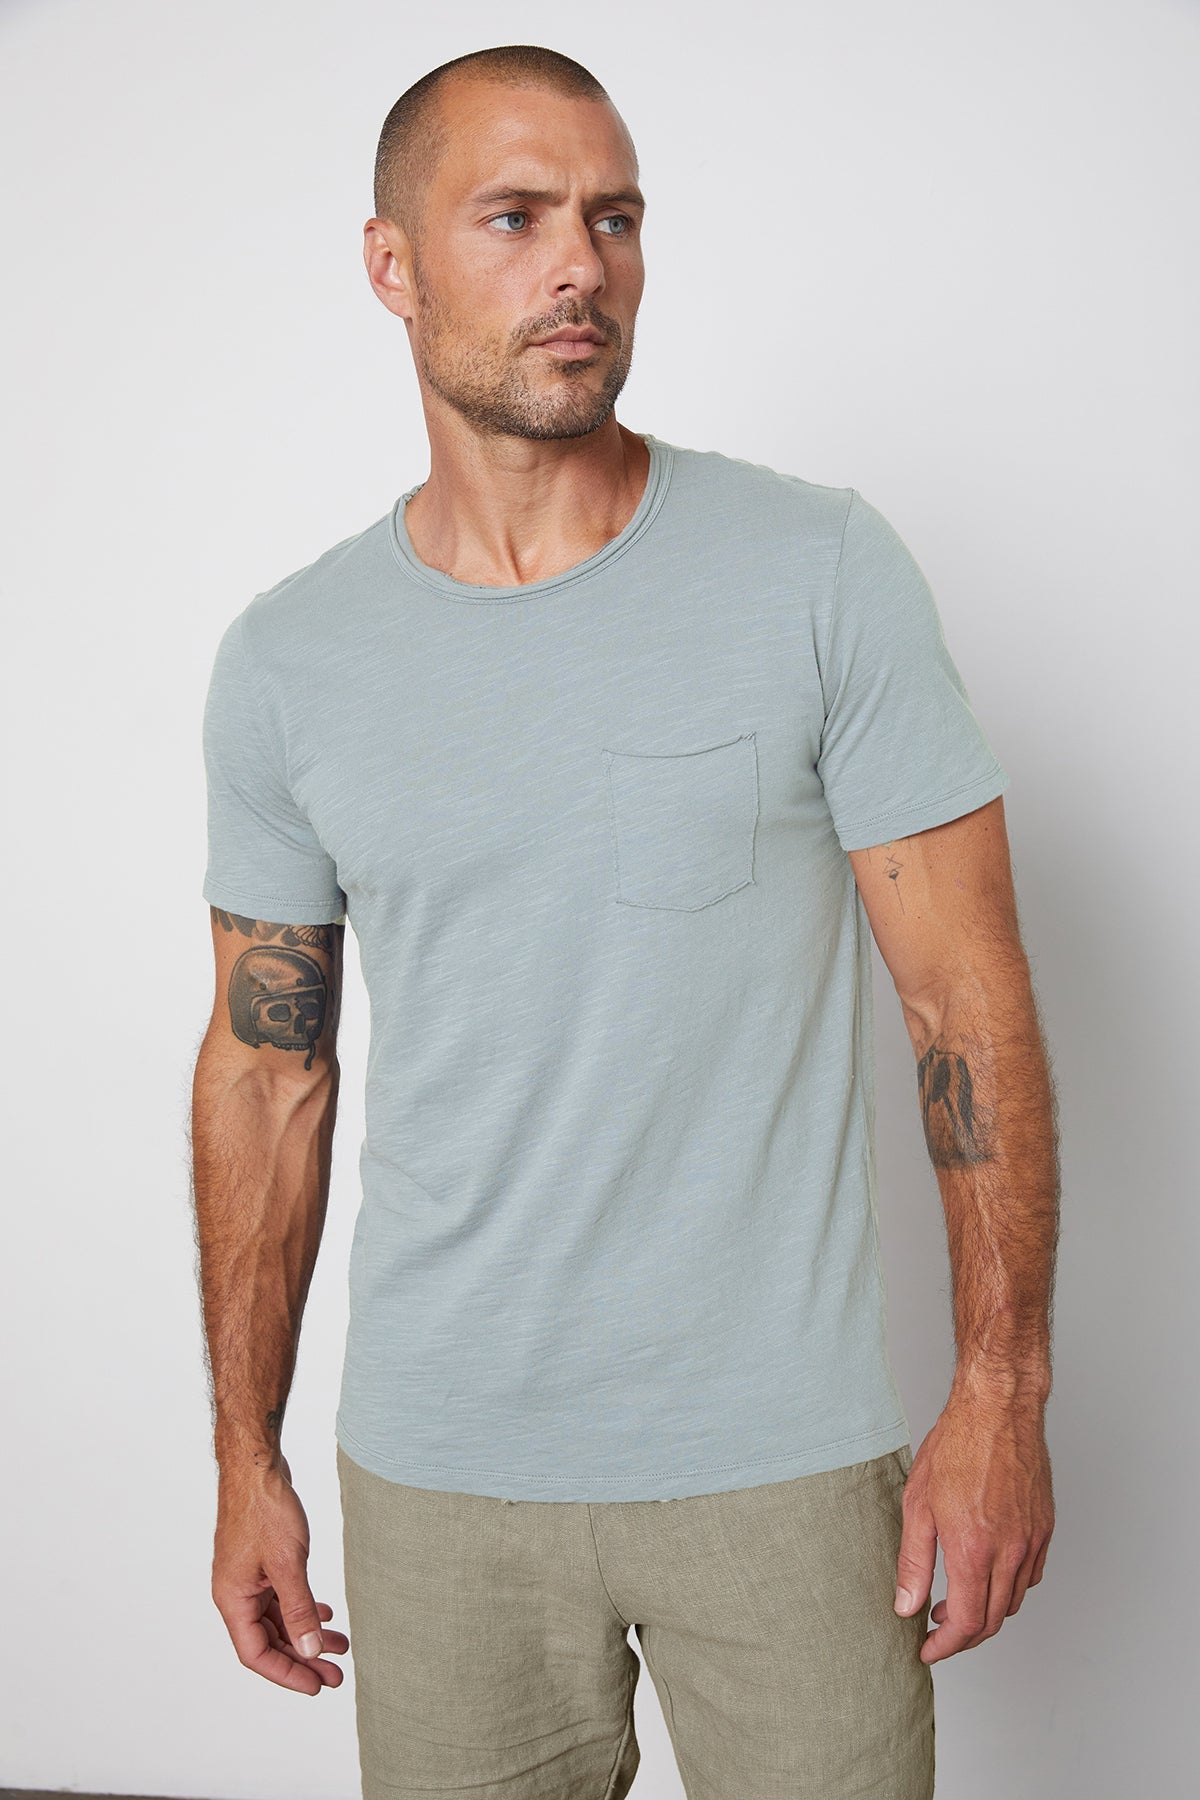 Chad Raw Edge Cotton Slub Pocket Tee in riptide with Jonathan shorts in olive front-25328431038657